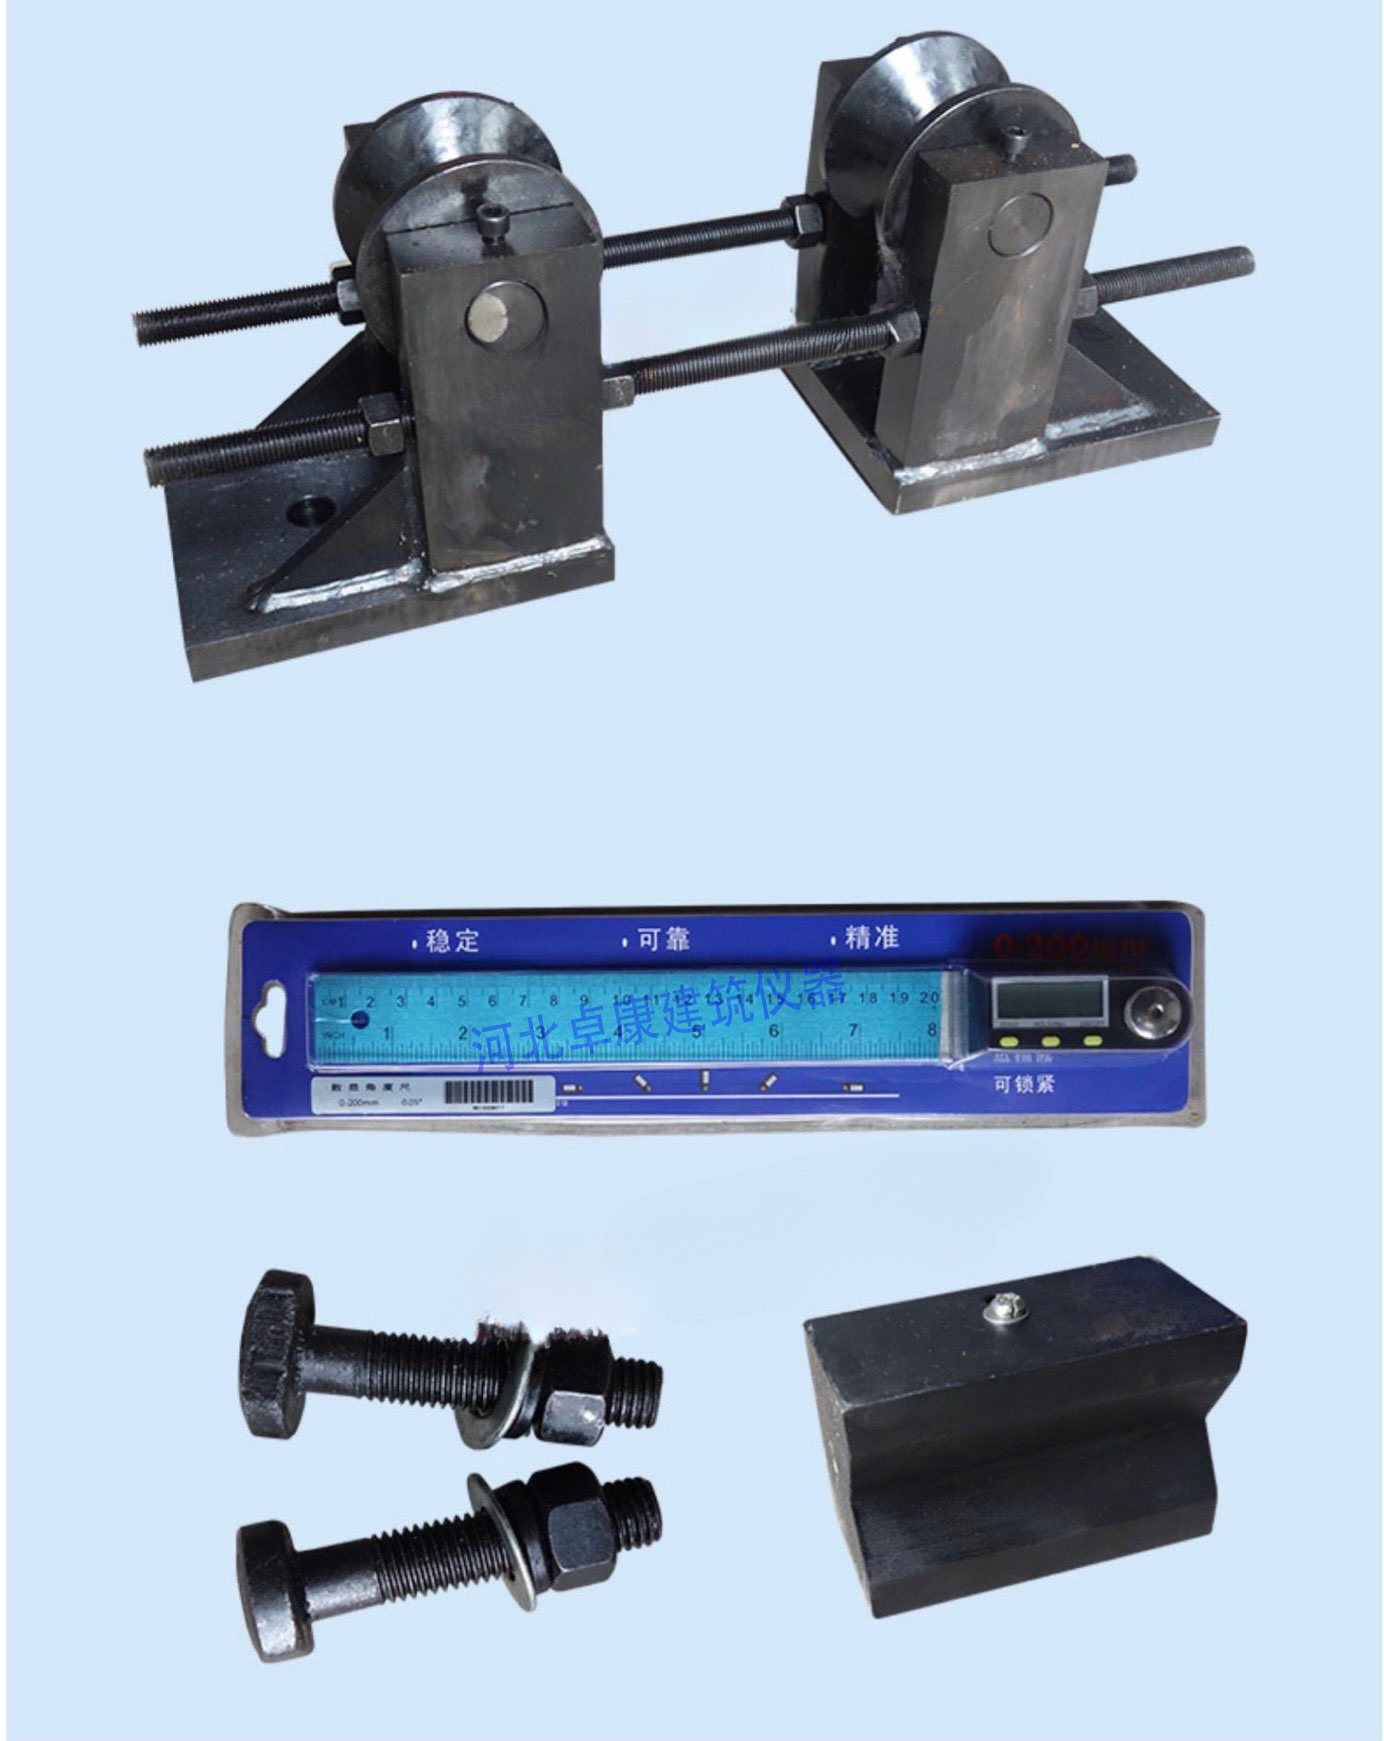 Rebar reverse bending fixture testing machine device, forward and reverse new standard hot rolled ribbed forward auxiliary equipment, repeated